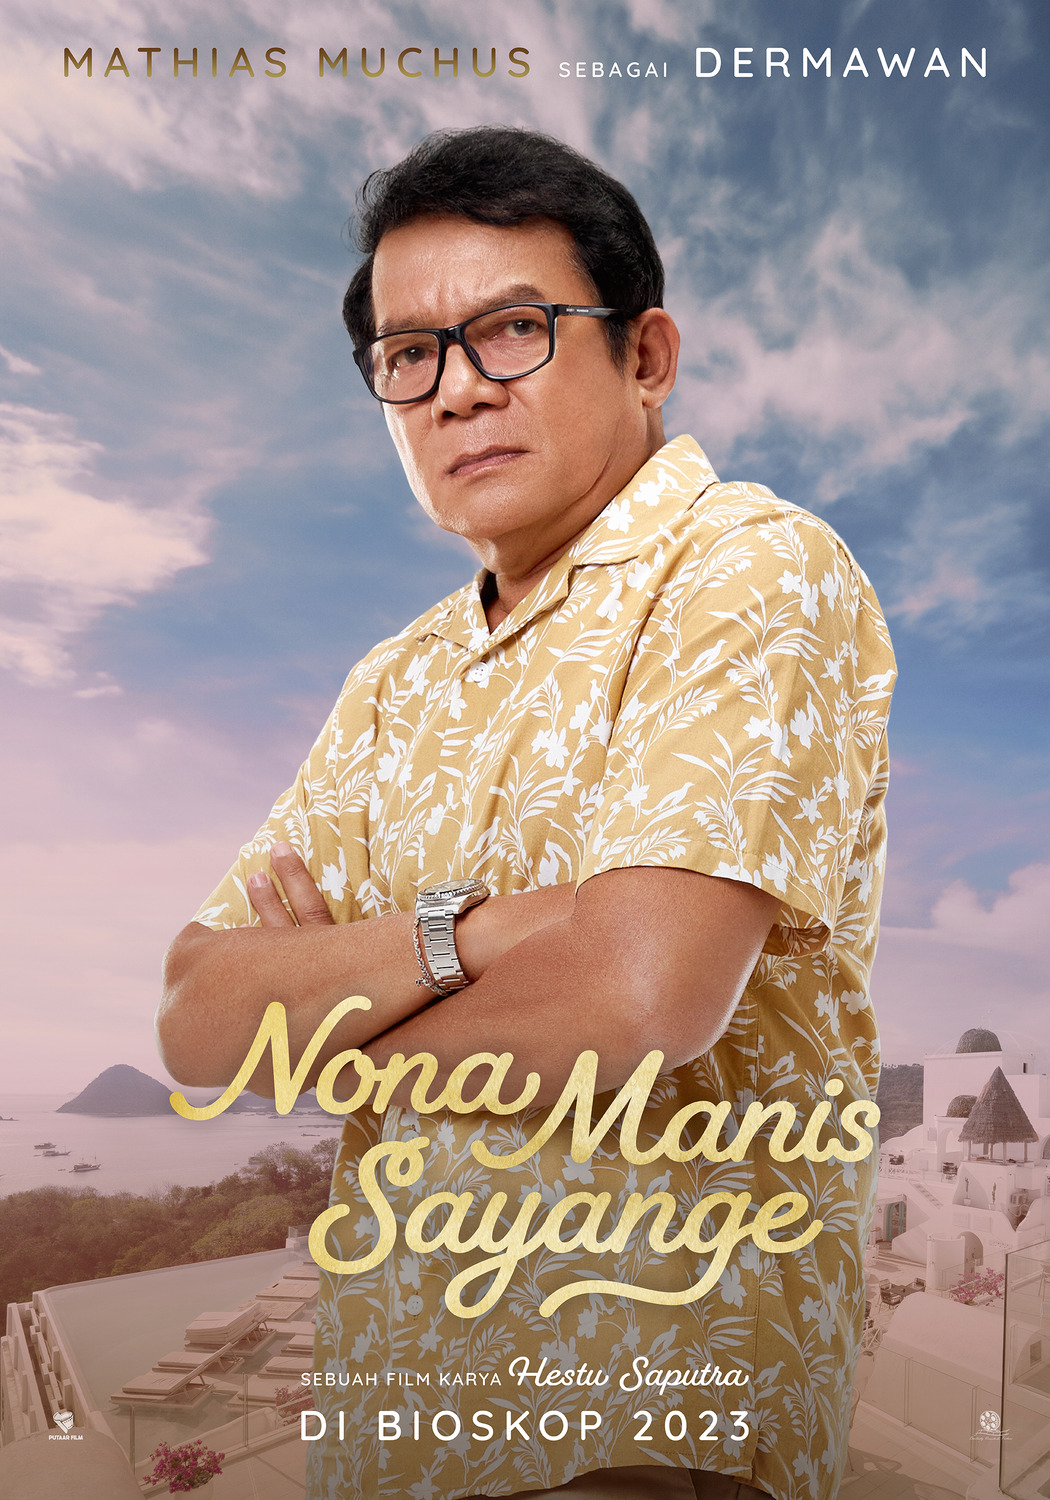 Extra Large Movie Poster Image for Nona Manis Sayange (#5 of 6)